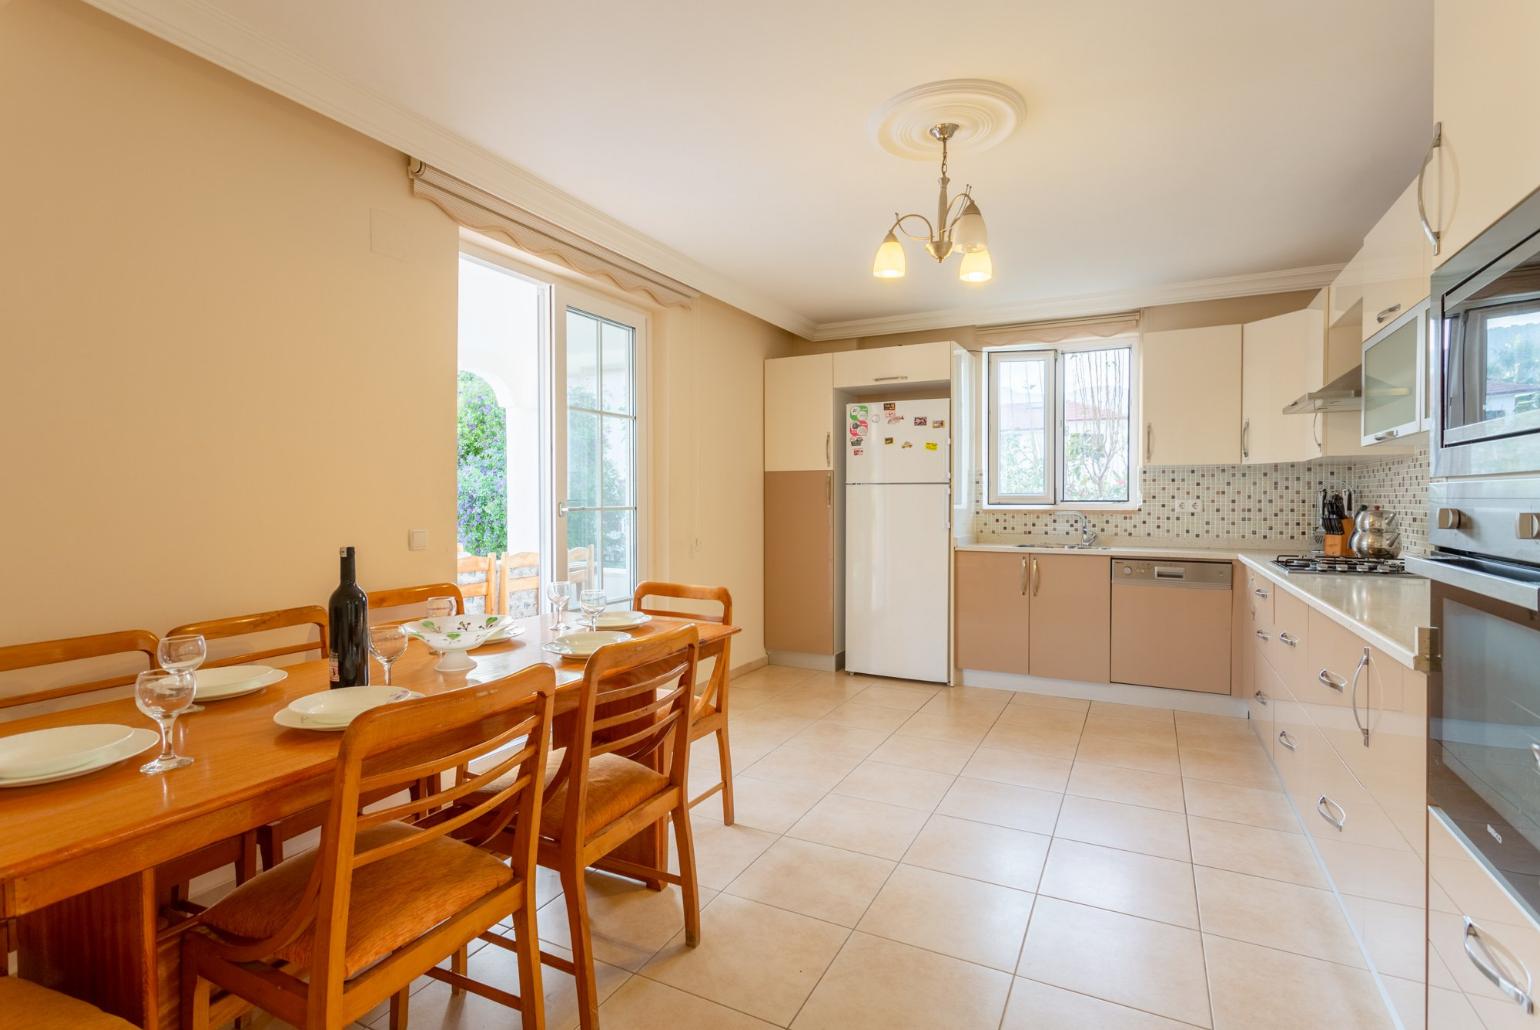 Equipped kitchen with dining area